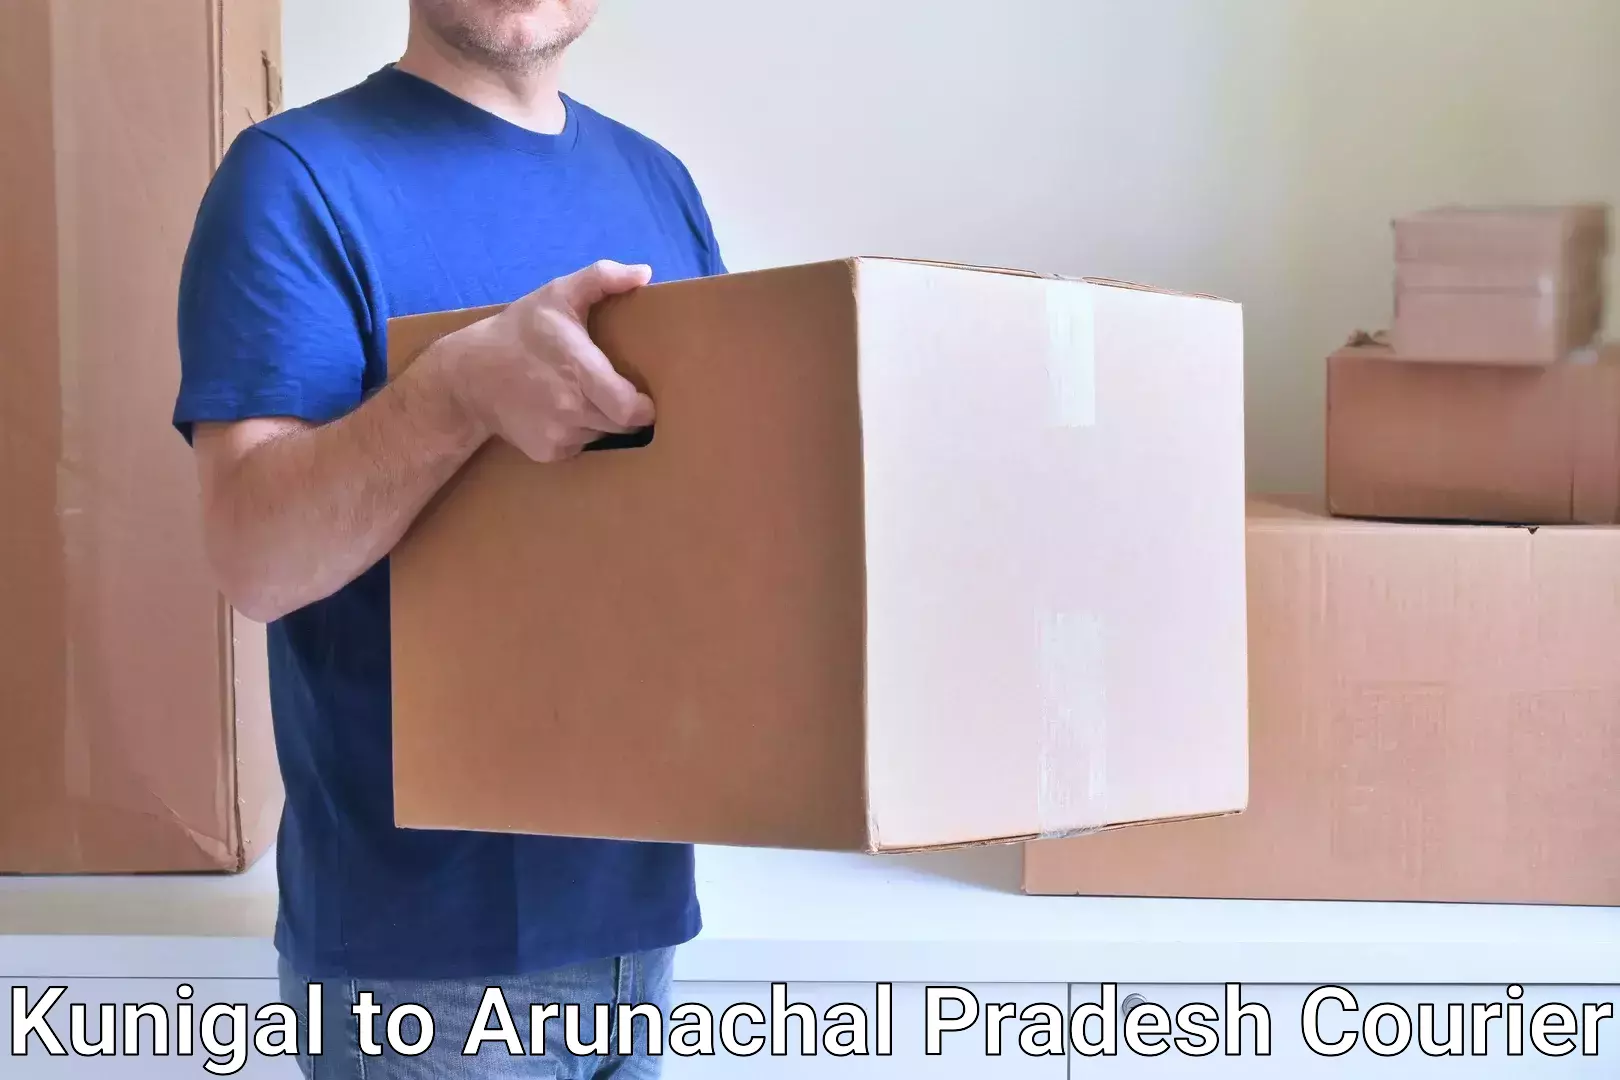 State-of-the-art courier technology in Kunigal to Nirjuli